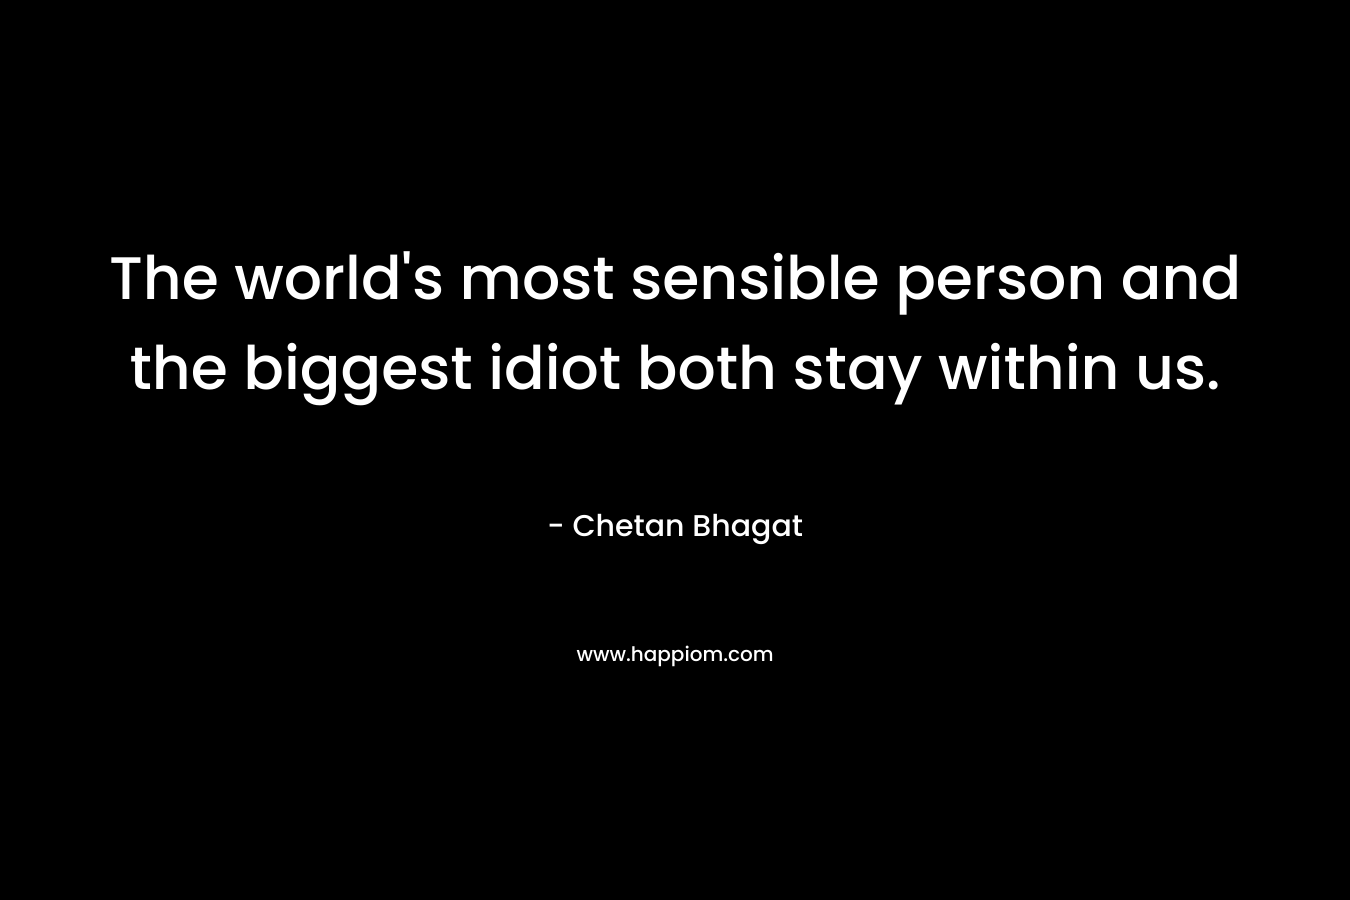 The world’s most sensible person and the biggest idiot both stay within us. – Chetan Bhagat